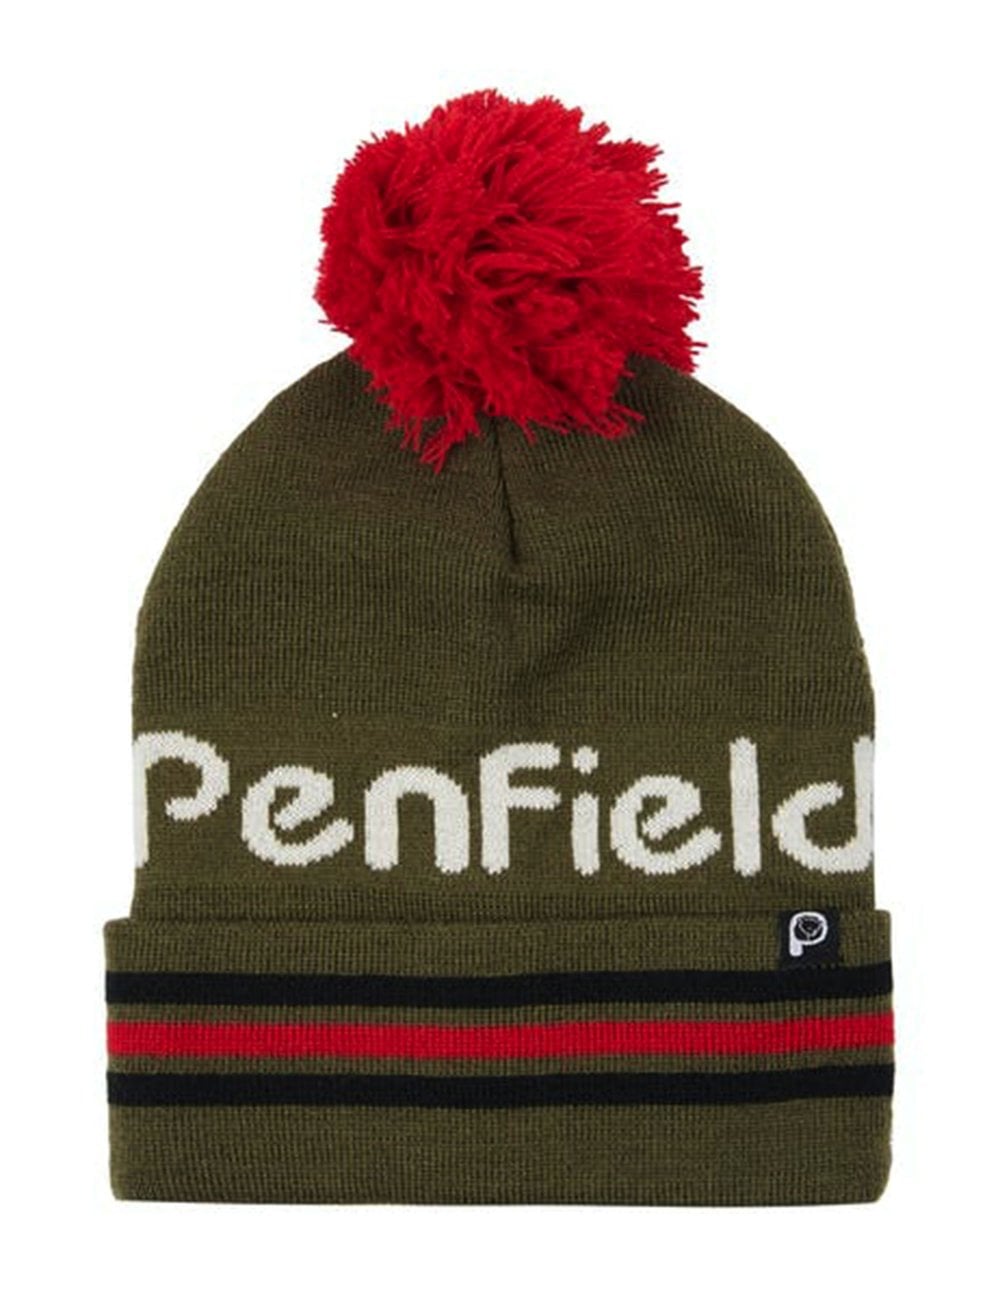 Penfield Intarsia Knit Striped Bobble Hat Unisex Beanie Penfield 